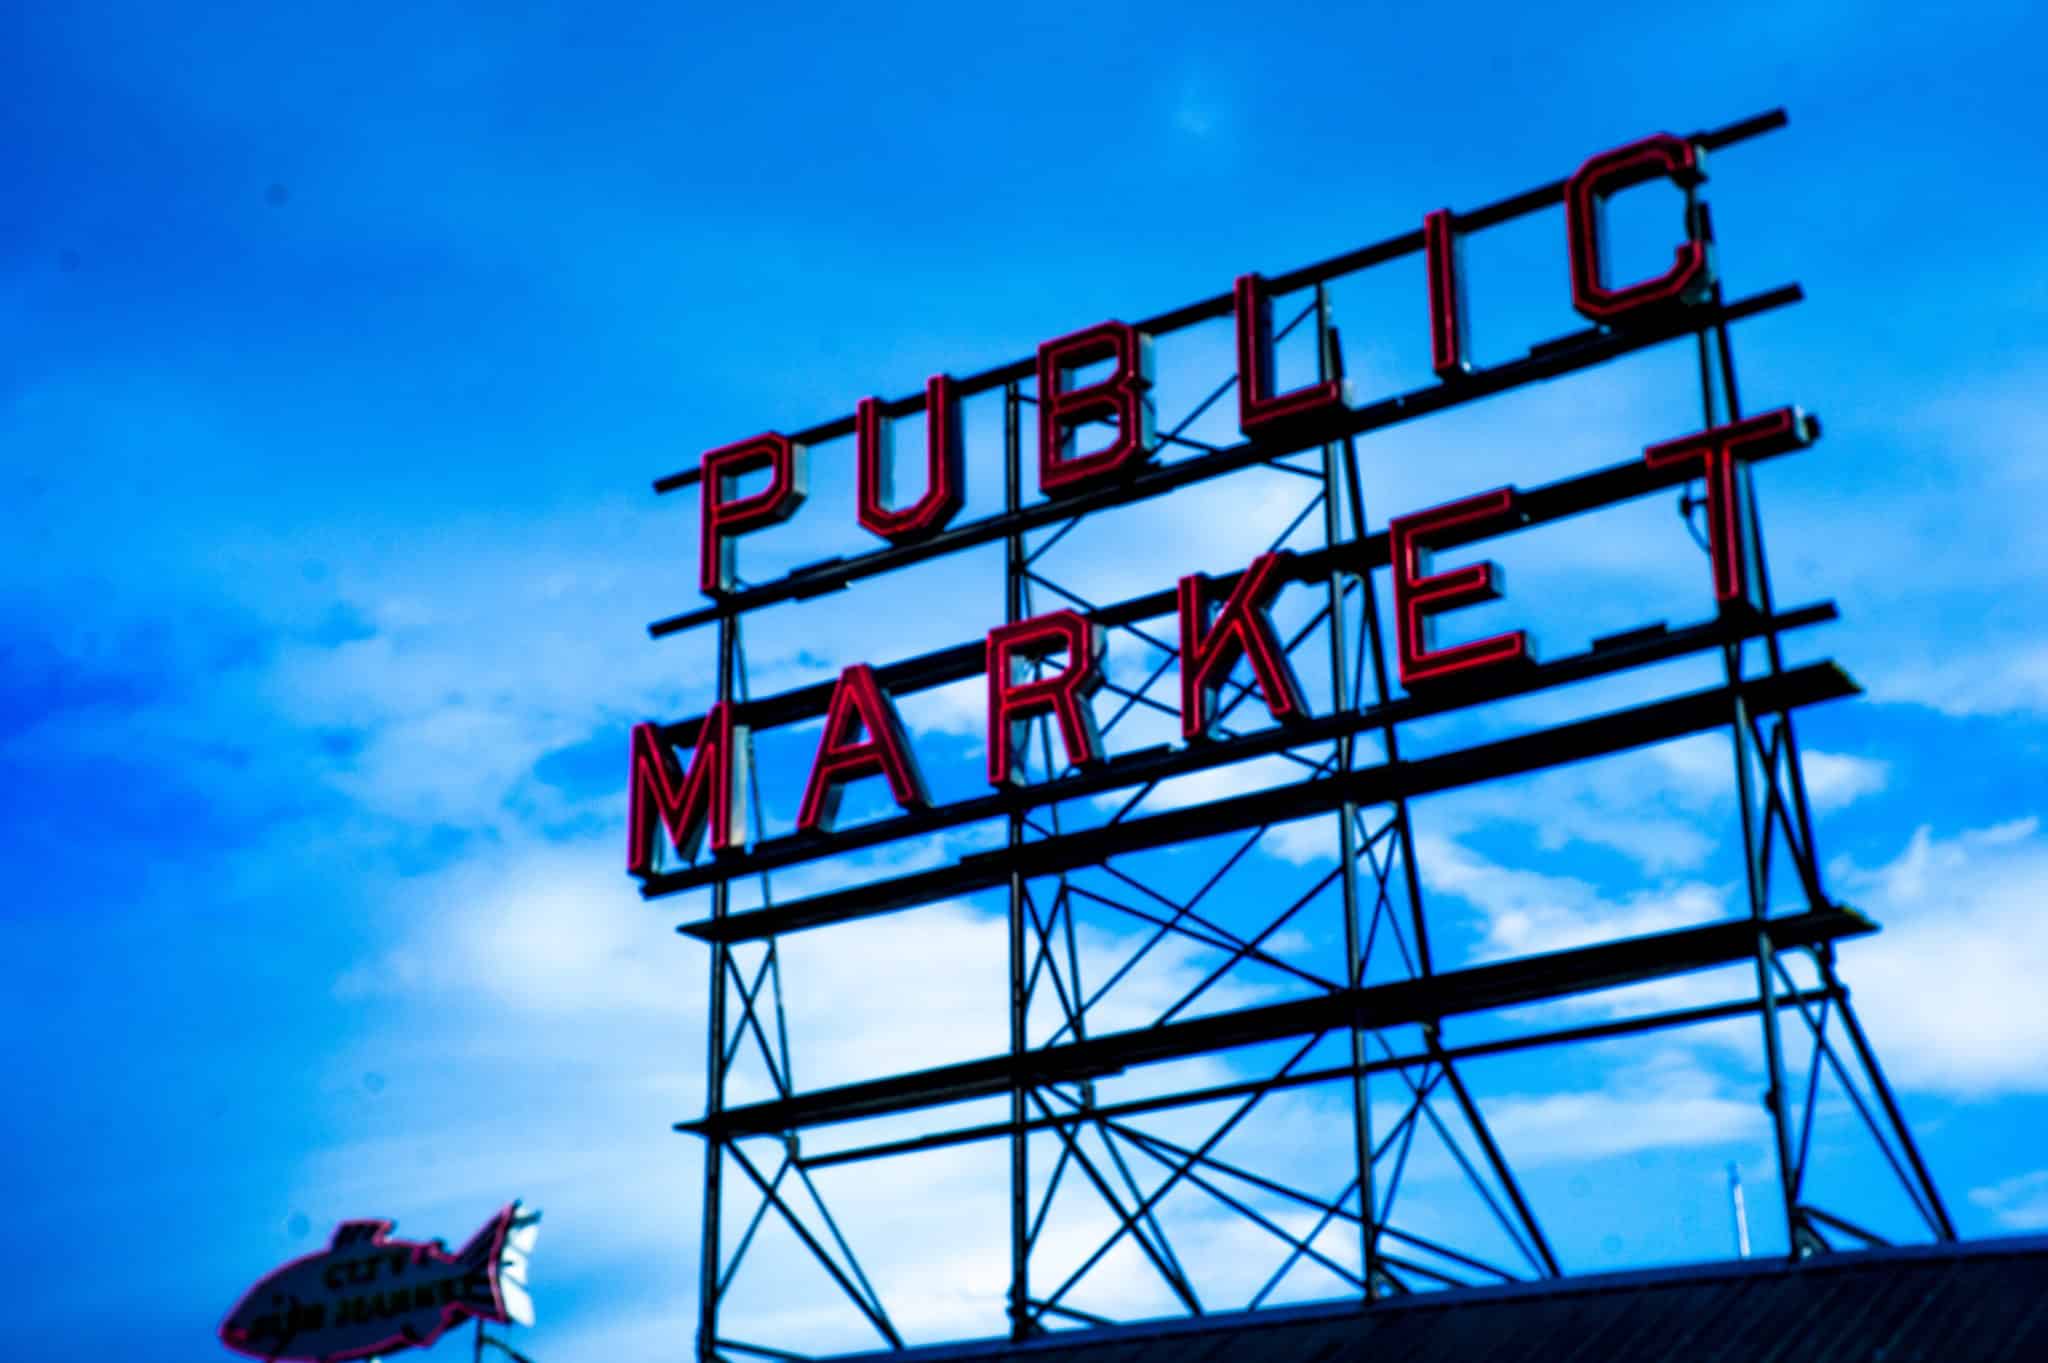 Shop Local at Pike Place Market